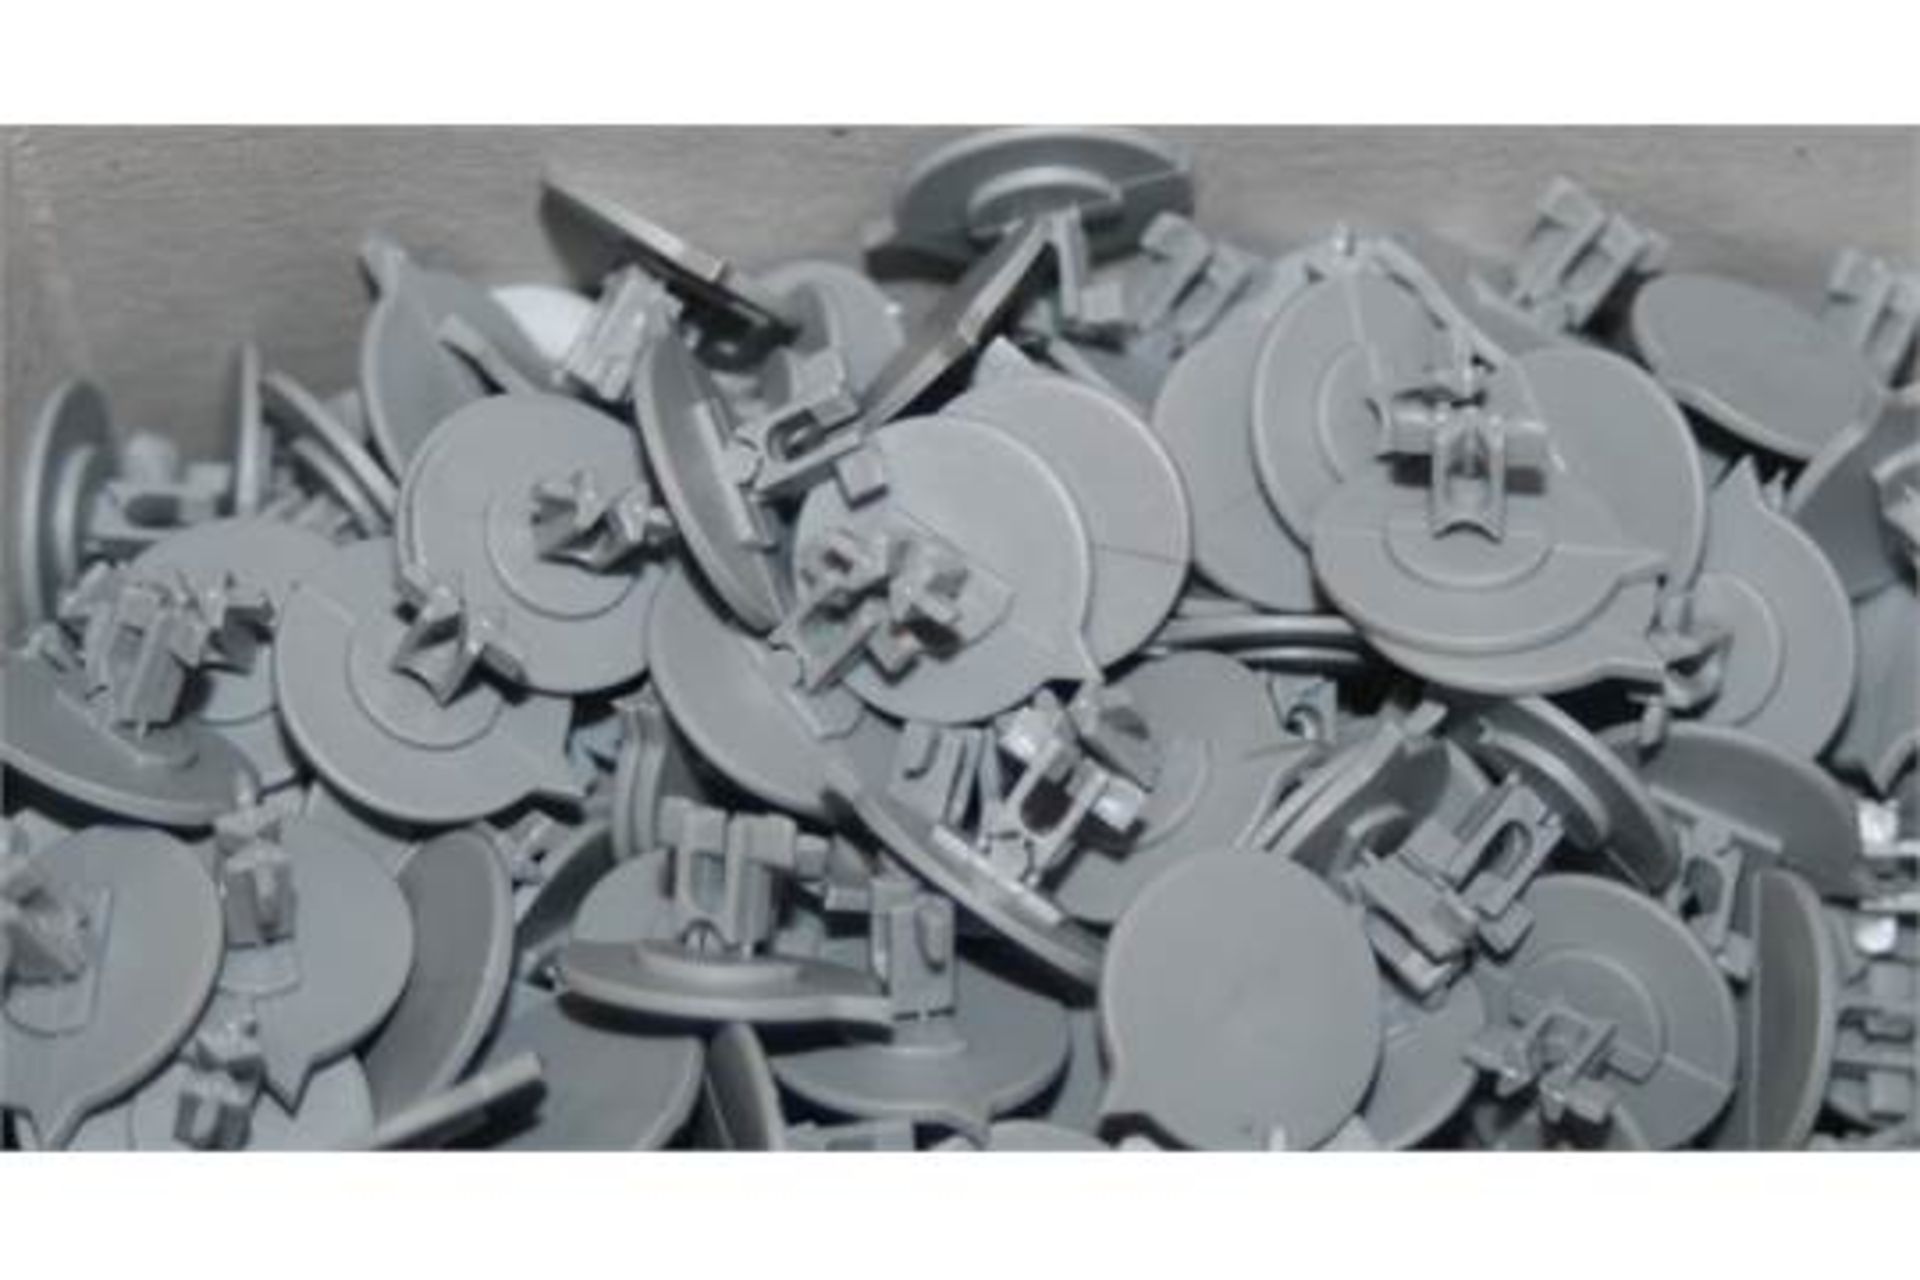 5,000 x Versapak Security Seals - As Used Throughout The Postal System and Welcomed by Leading